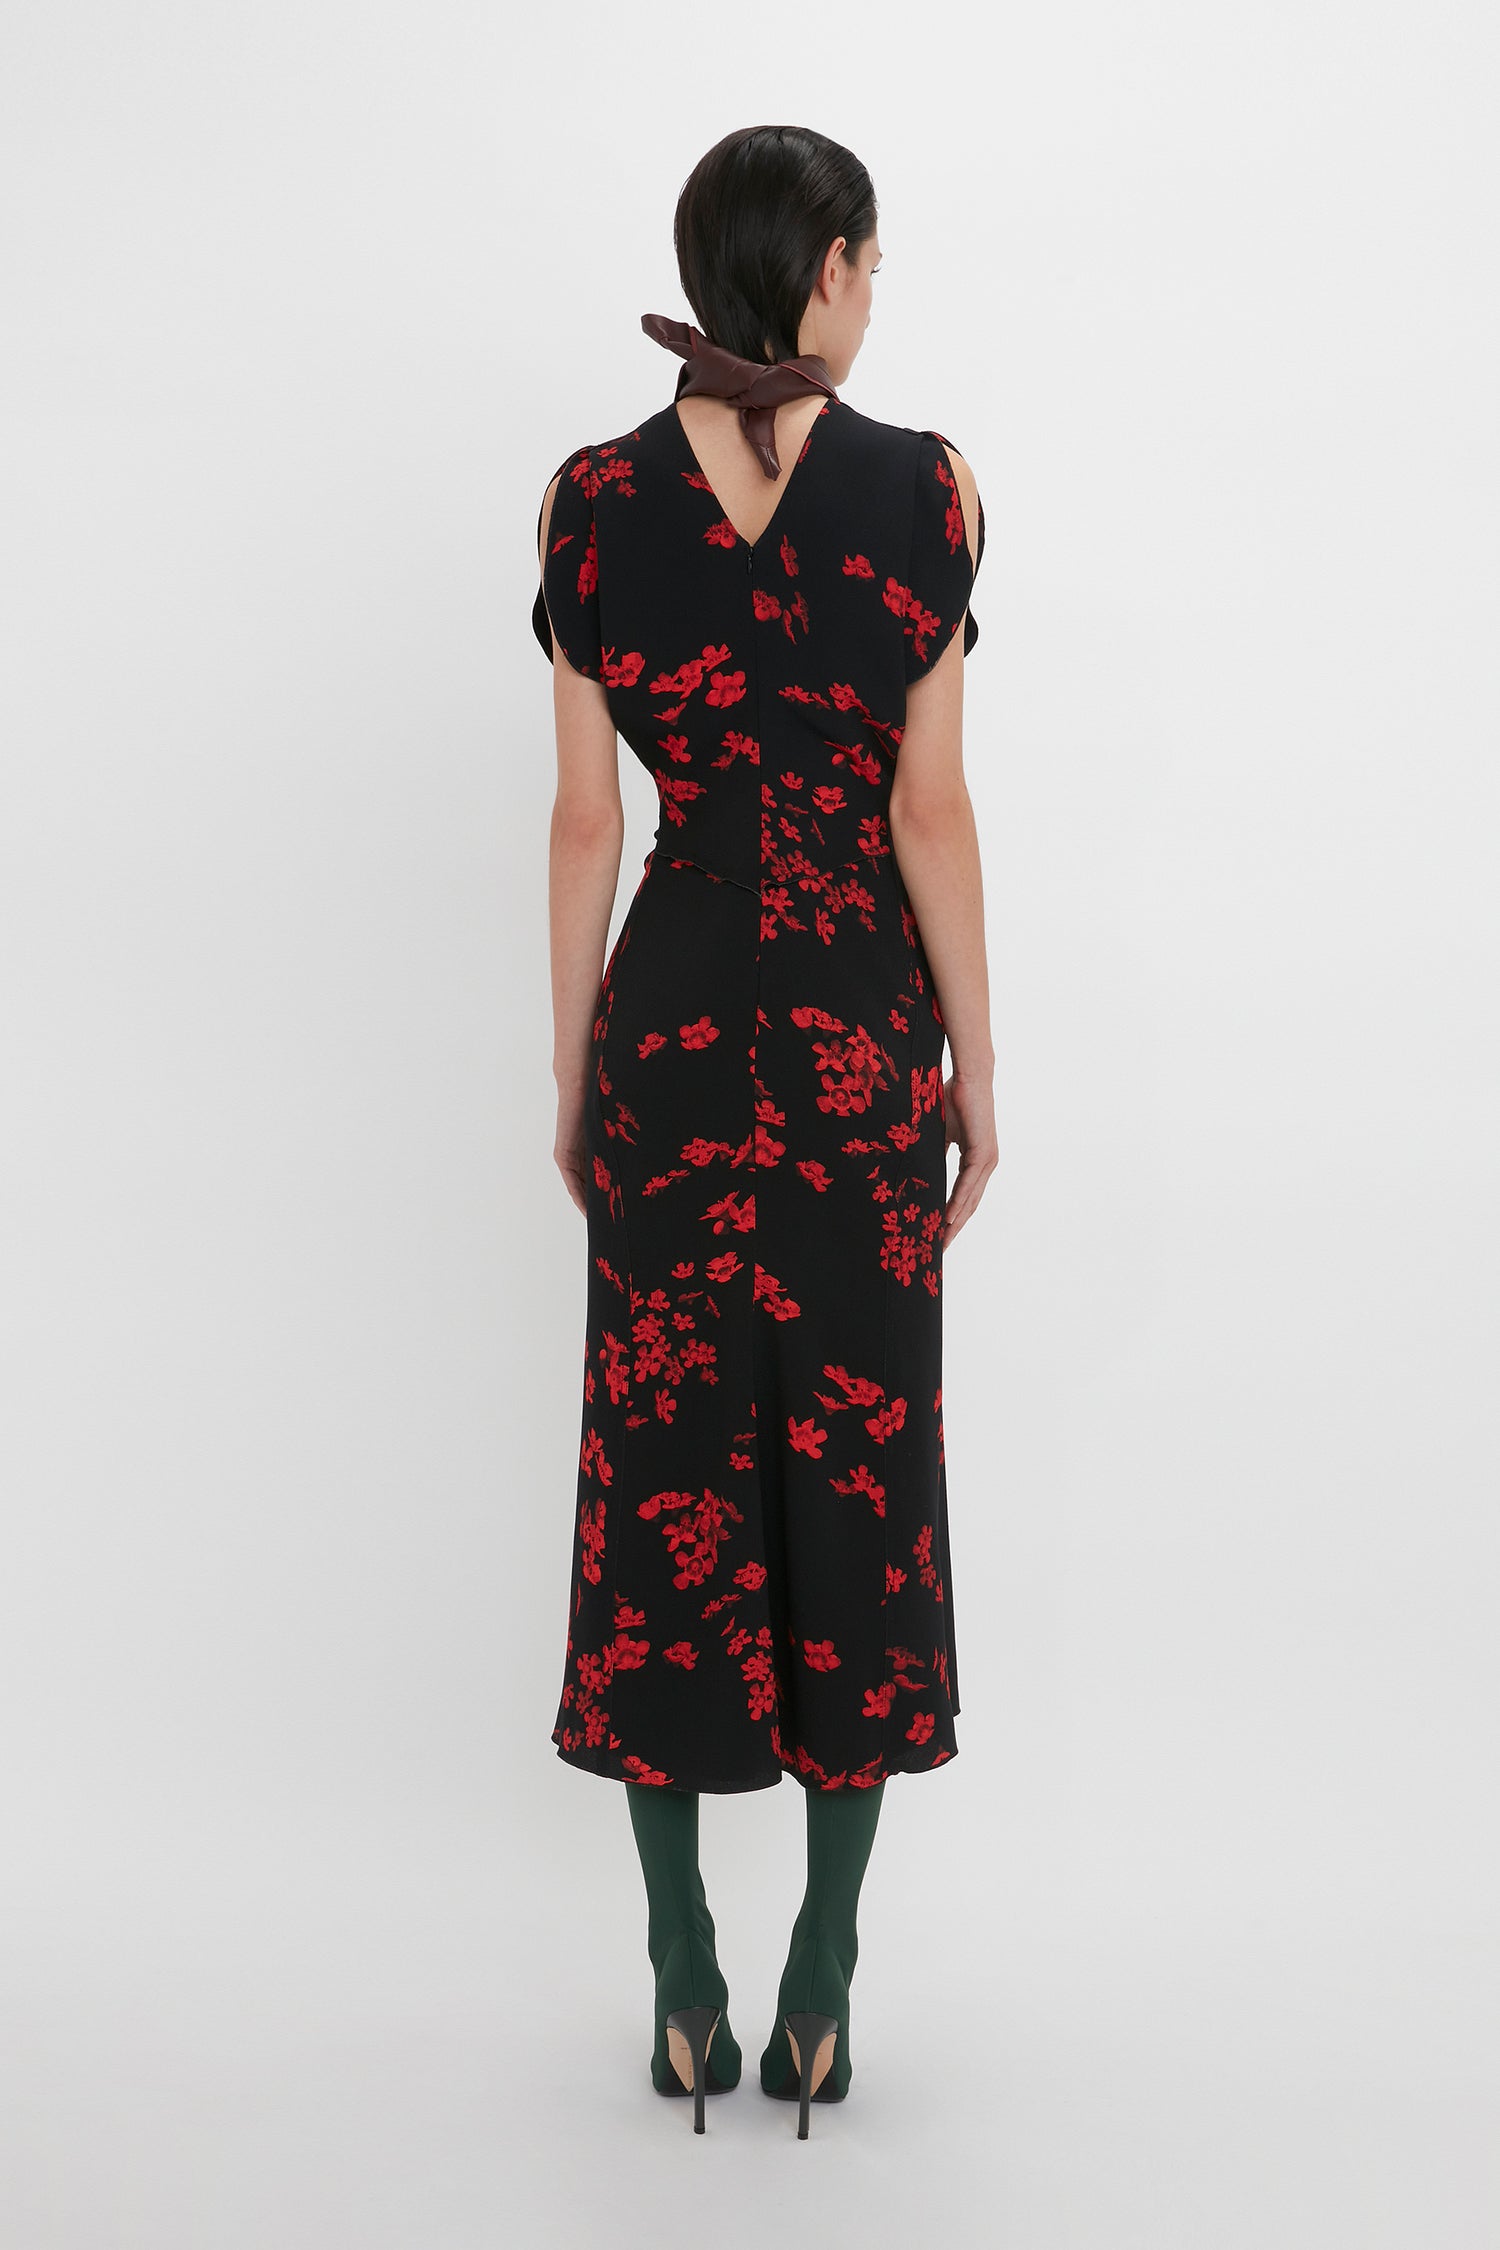 A person stands with their back facing the camera, wearing a black dress with red floral patterns and a fit-and-flare silhouette, complemented by green tights and black high-heeled shoes. The Gathered Waist Midi Dress In Sci-Fi Black Floral by Victoria Beckham features a keyhole back detail and is finished with a brown bow tie.